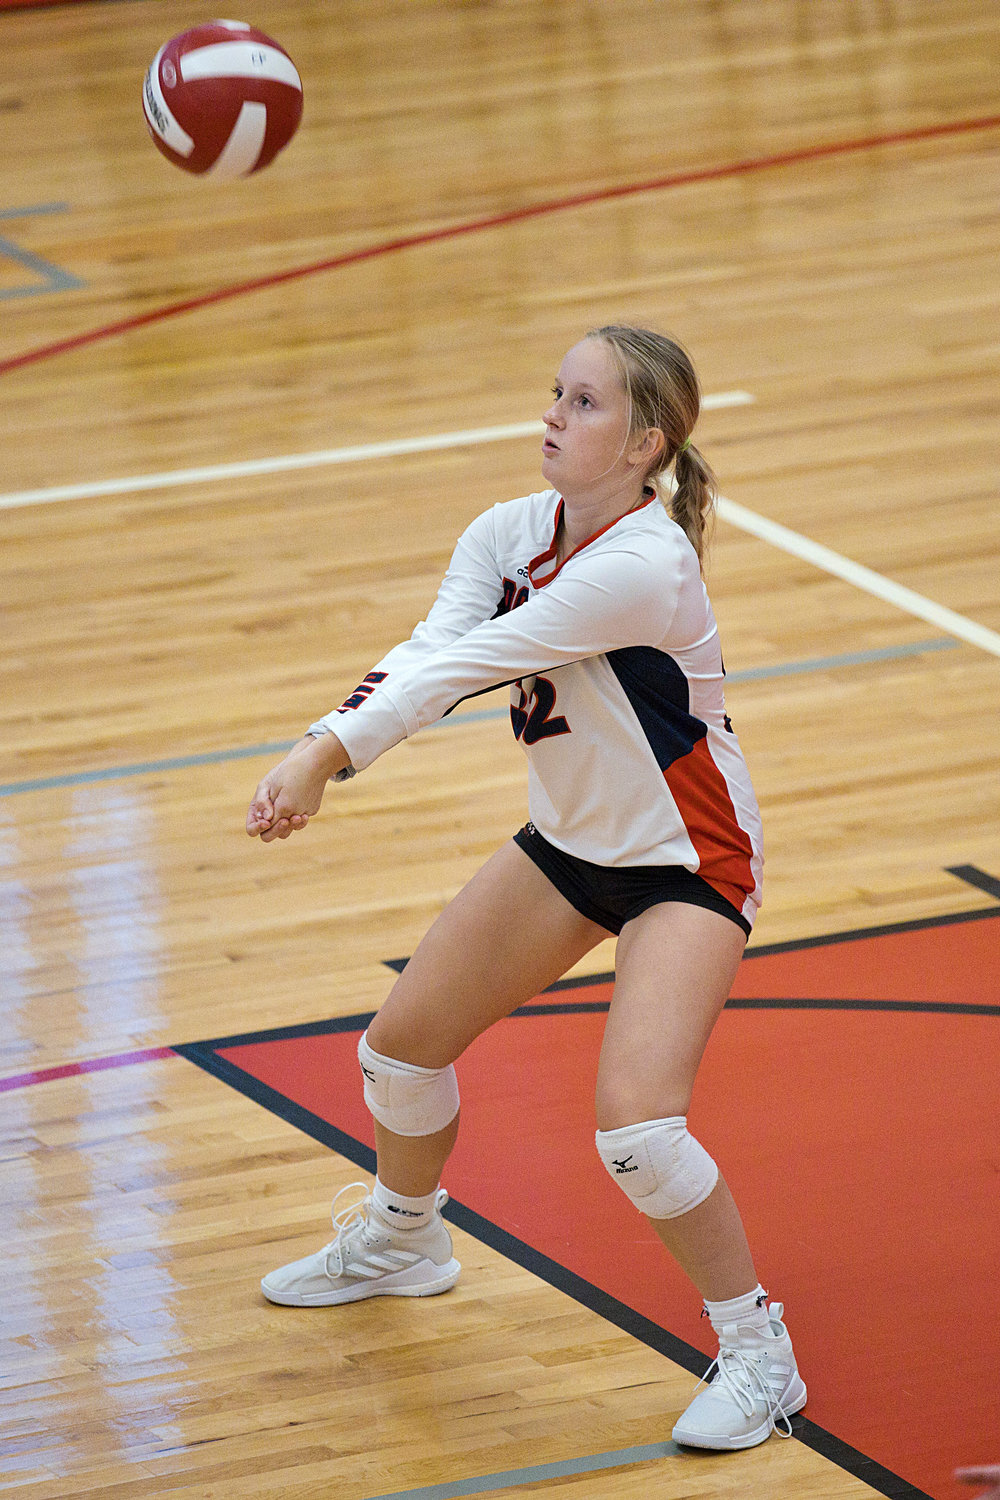 Adele Palmer receives a serve during Friday’s game.